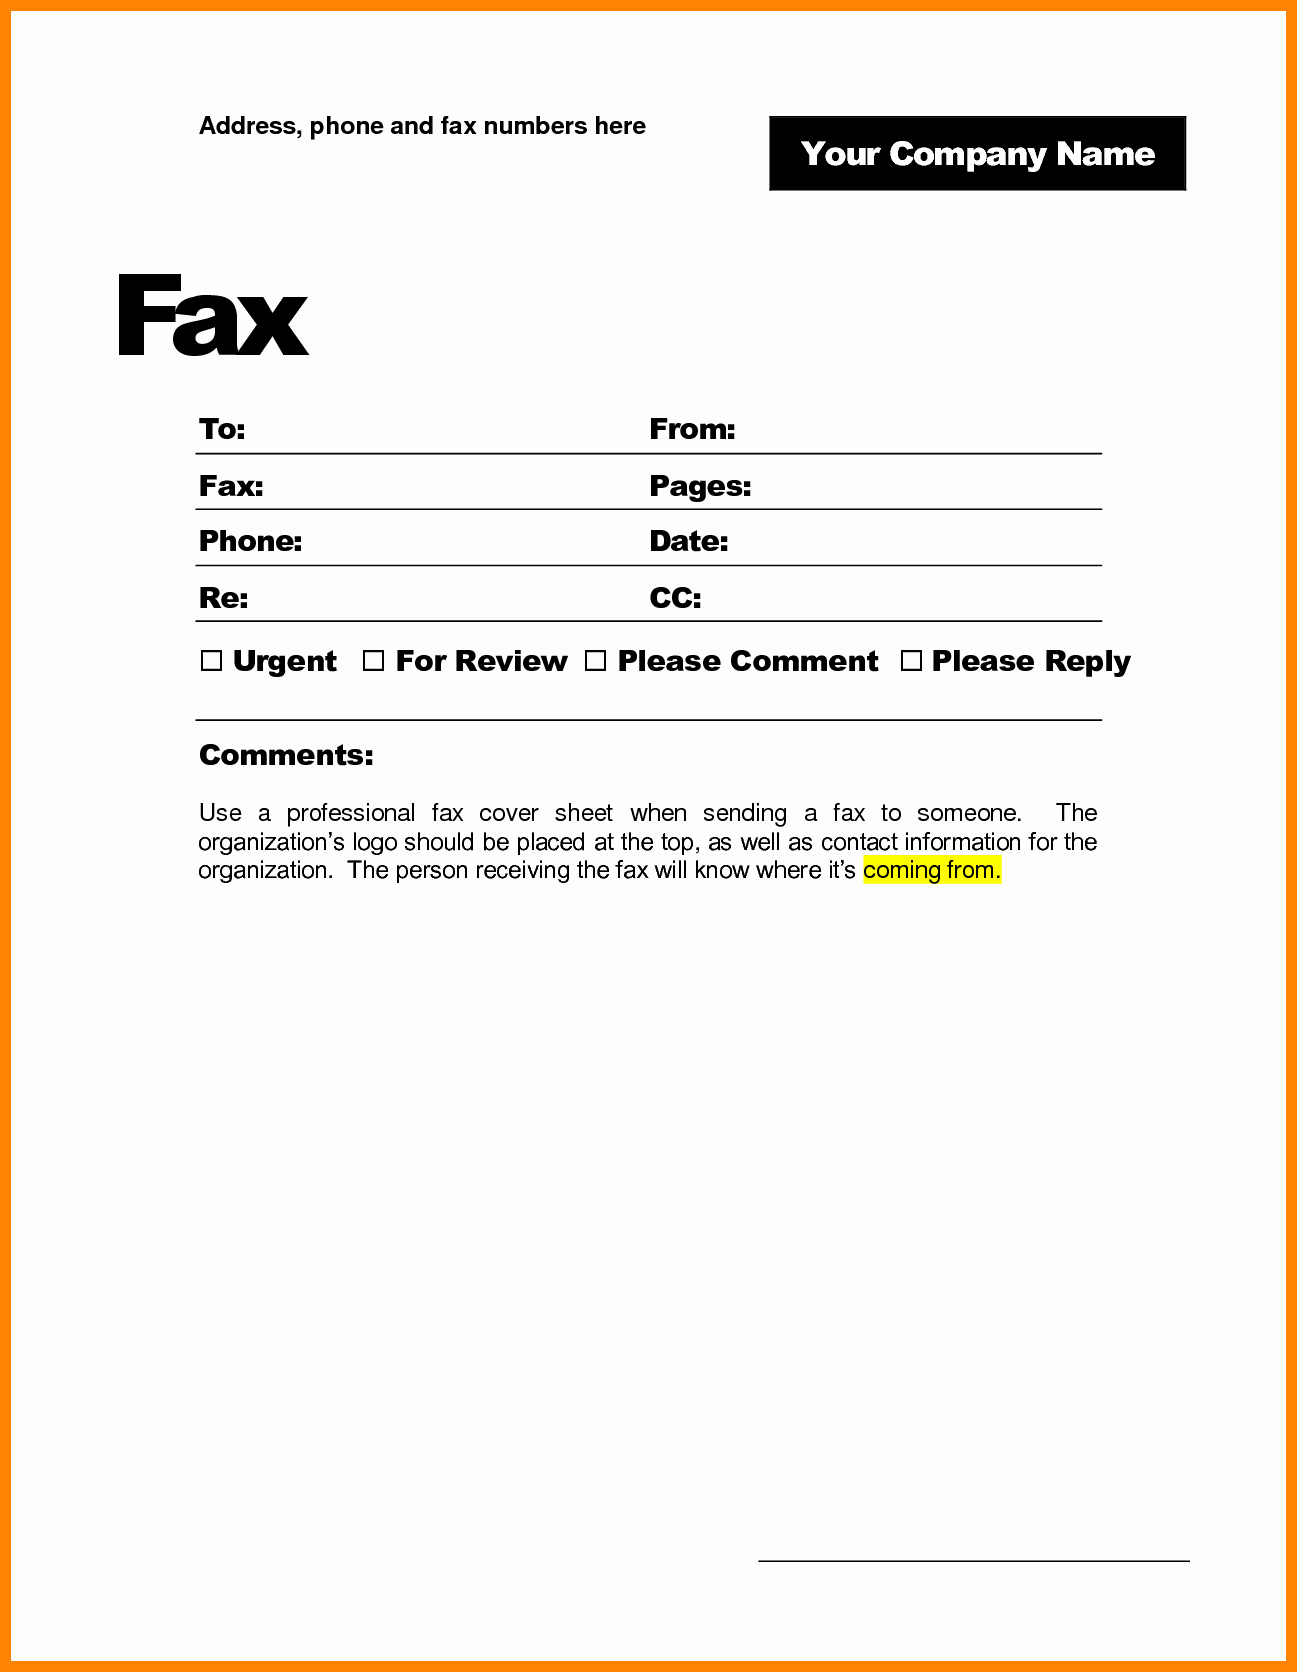 Free Fax Templates for Word Elegant 6 Free Fax Cover Sheet Template for Word